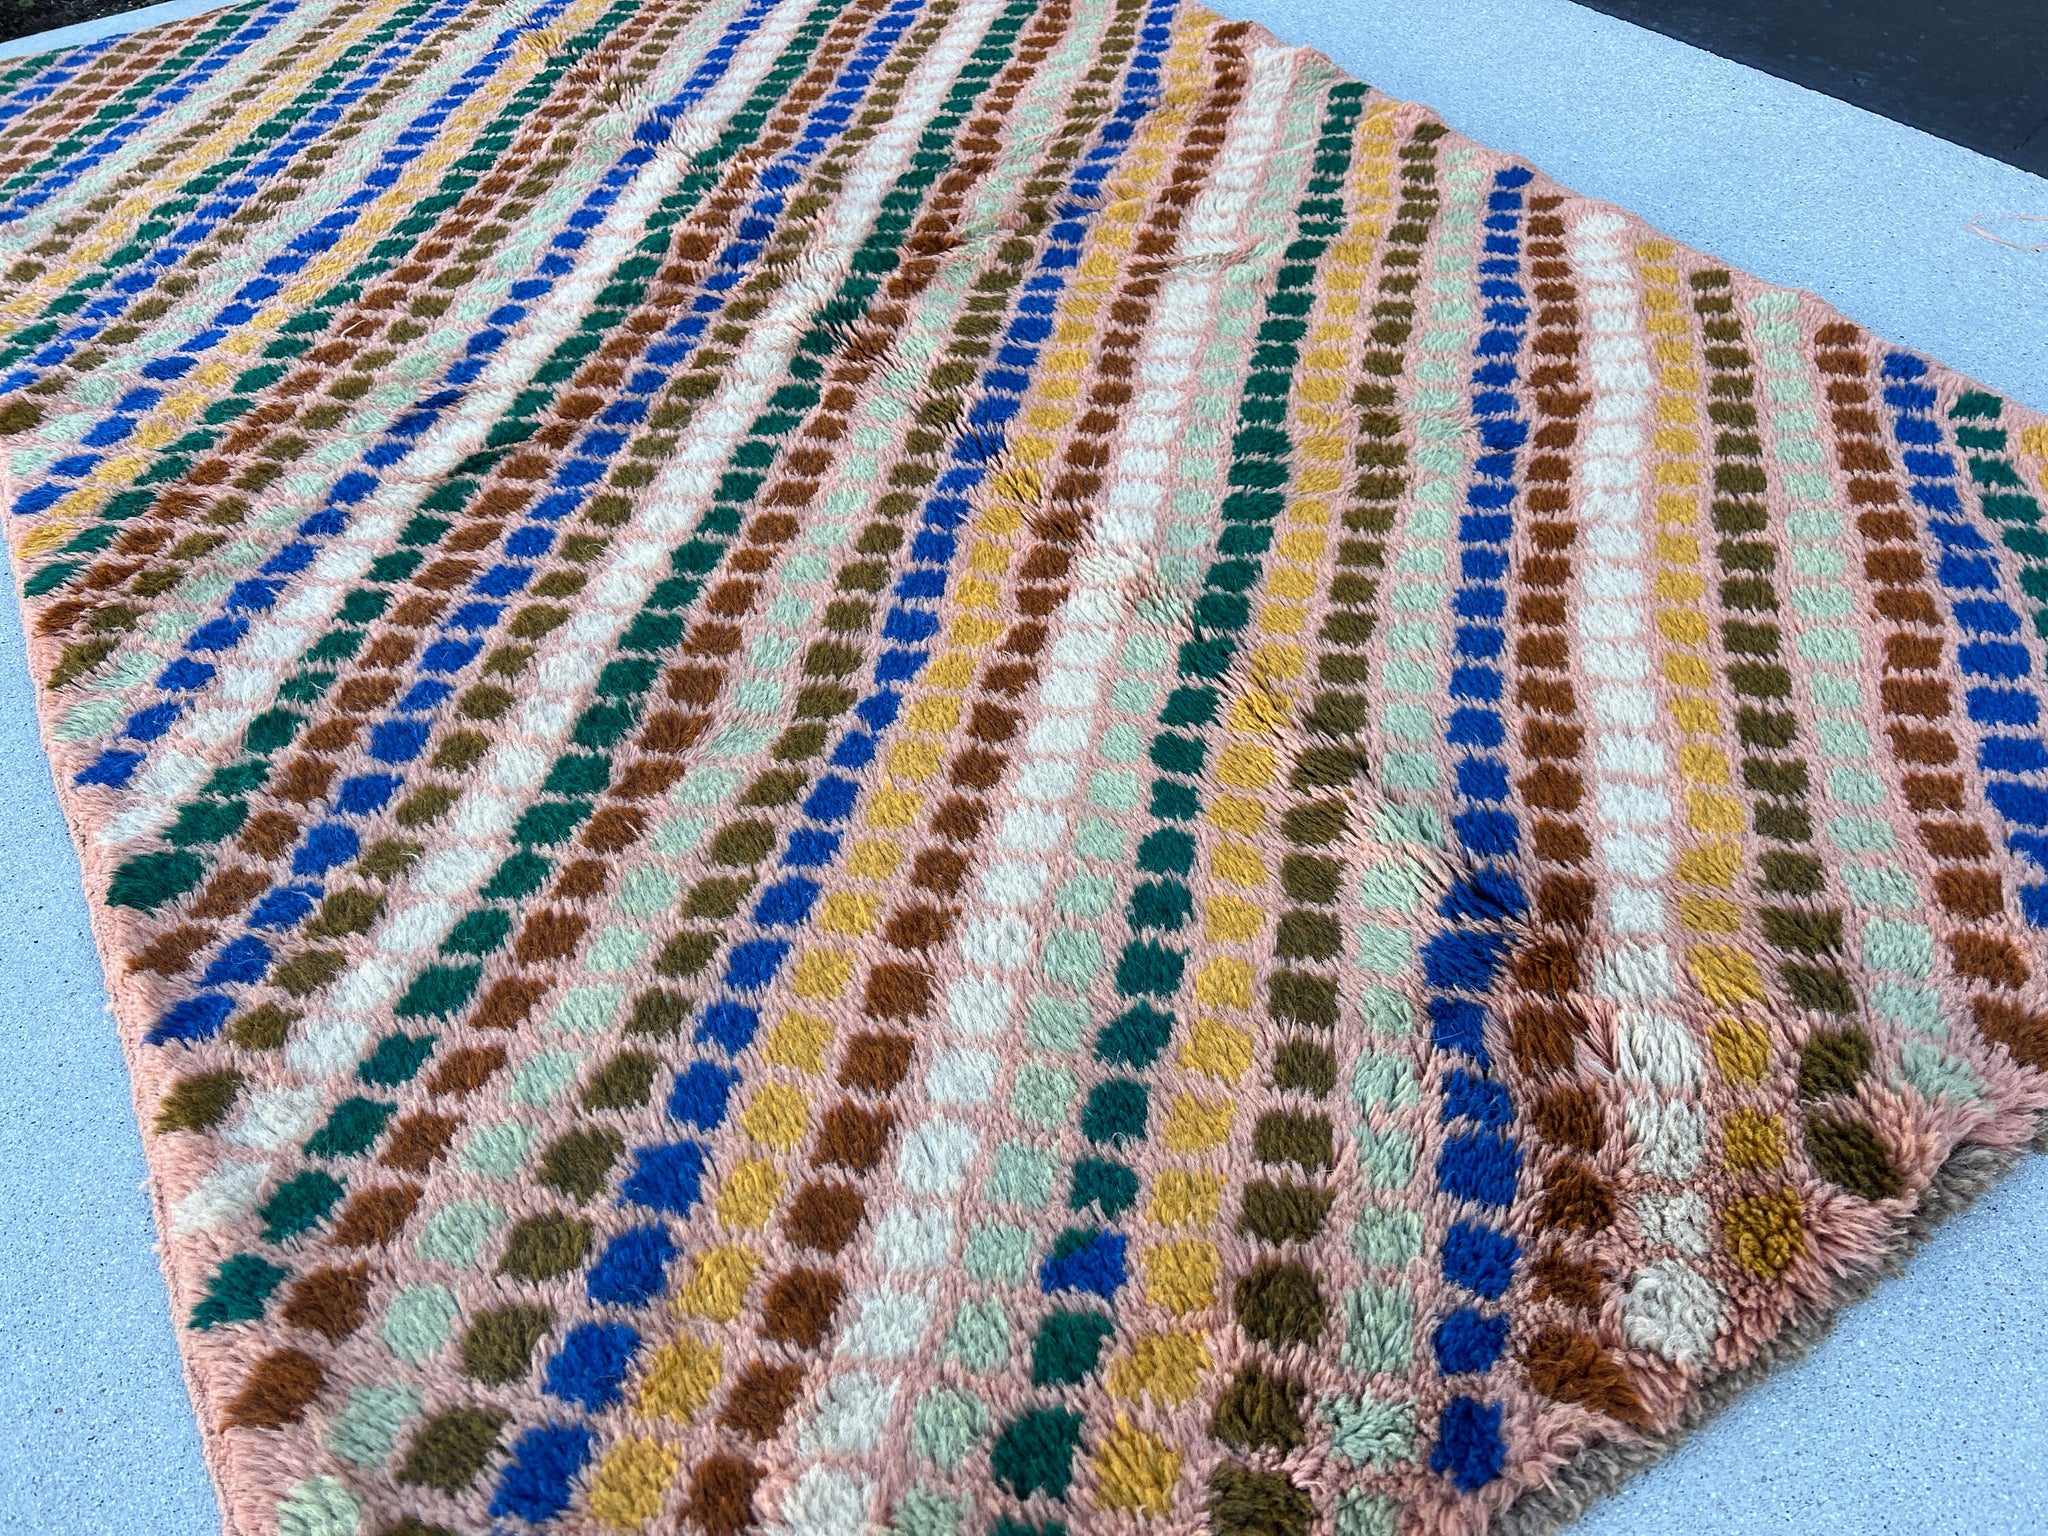 4x6 (120x185) Handmade Vintage Baluch Afghan Rug | Rose Pink Pine Green Golden Yellow Chocolate Turquoise Blue Ivory Golden Brown | Wool